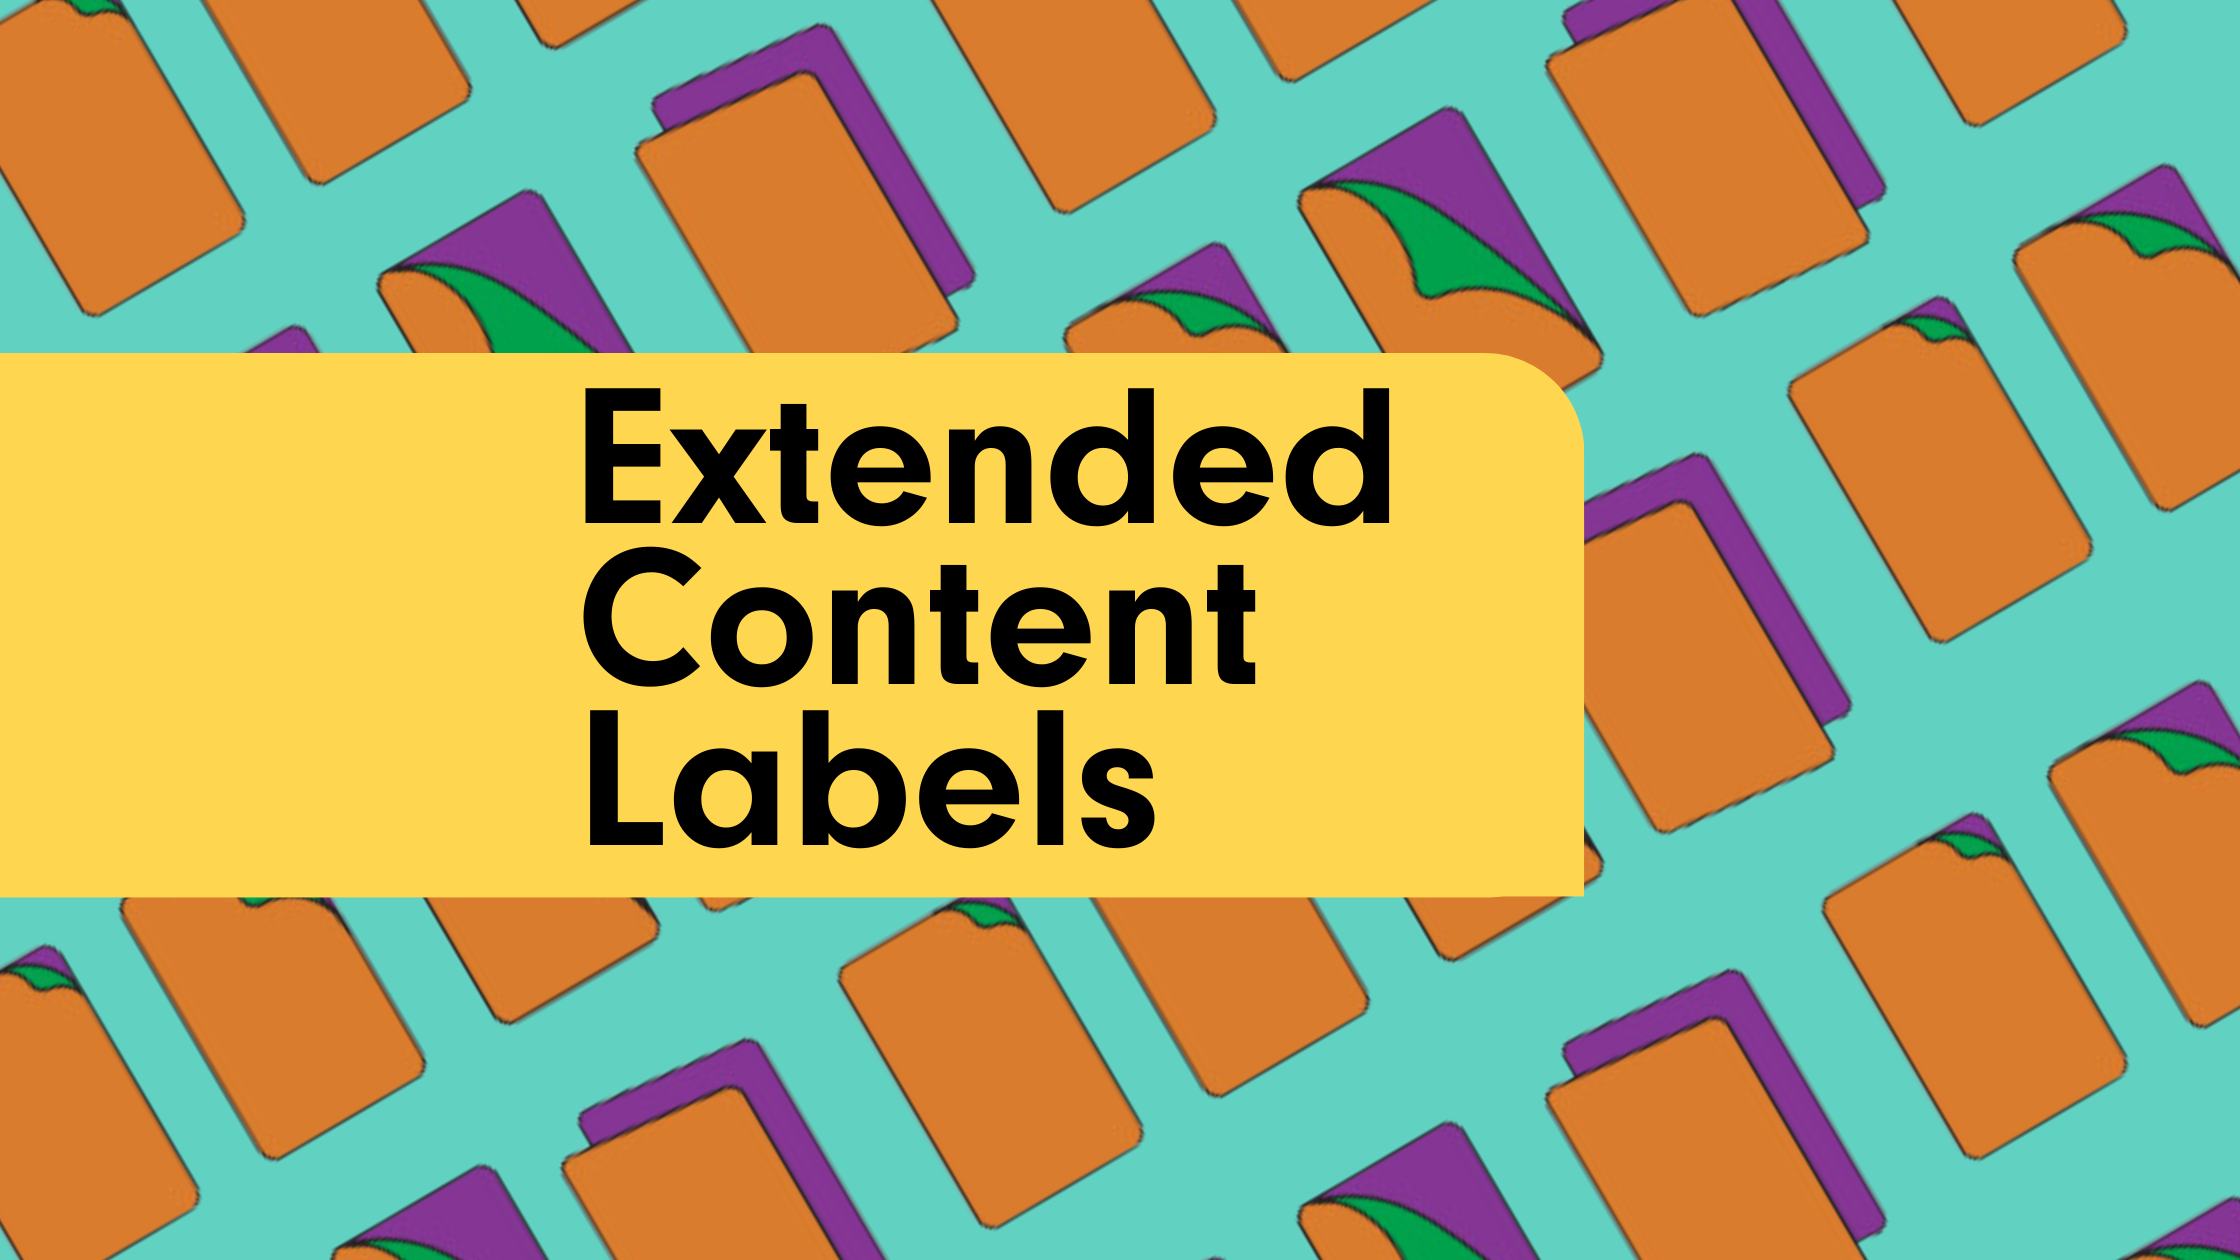 Image of How to leverage Extended Content Labels for maximum benefits